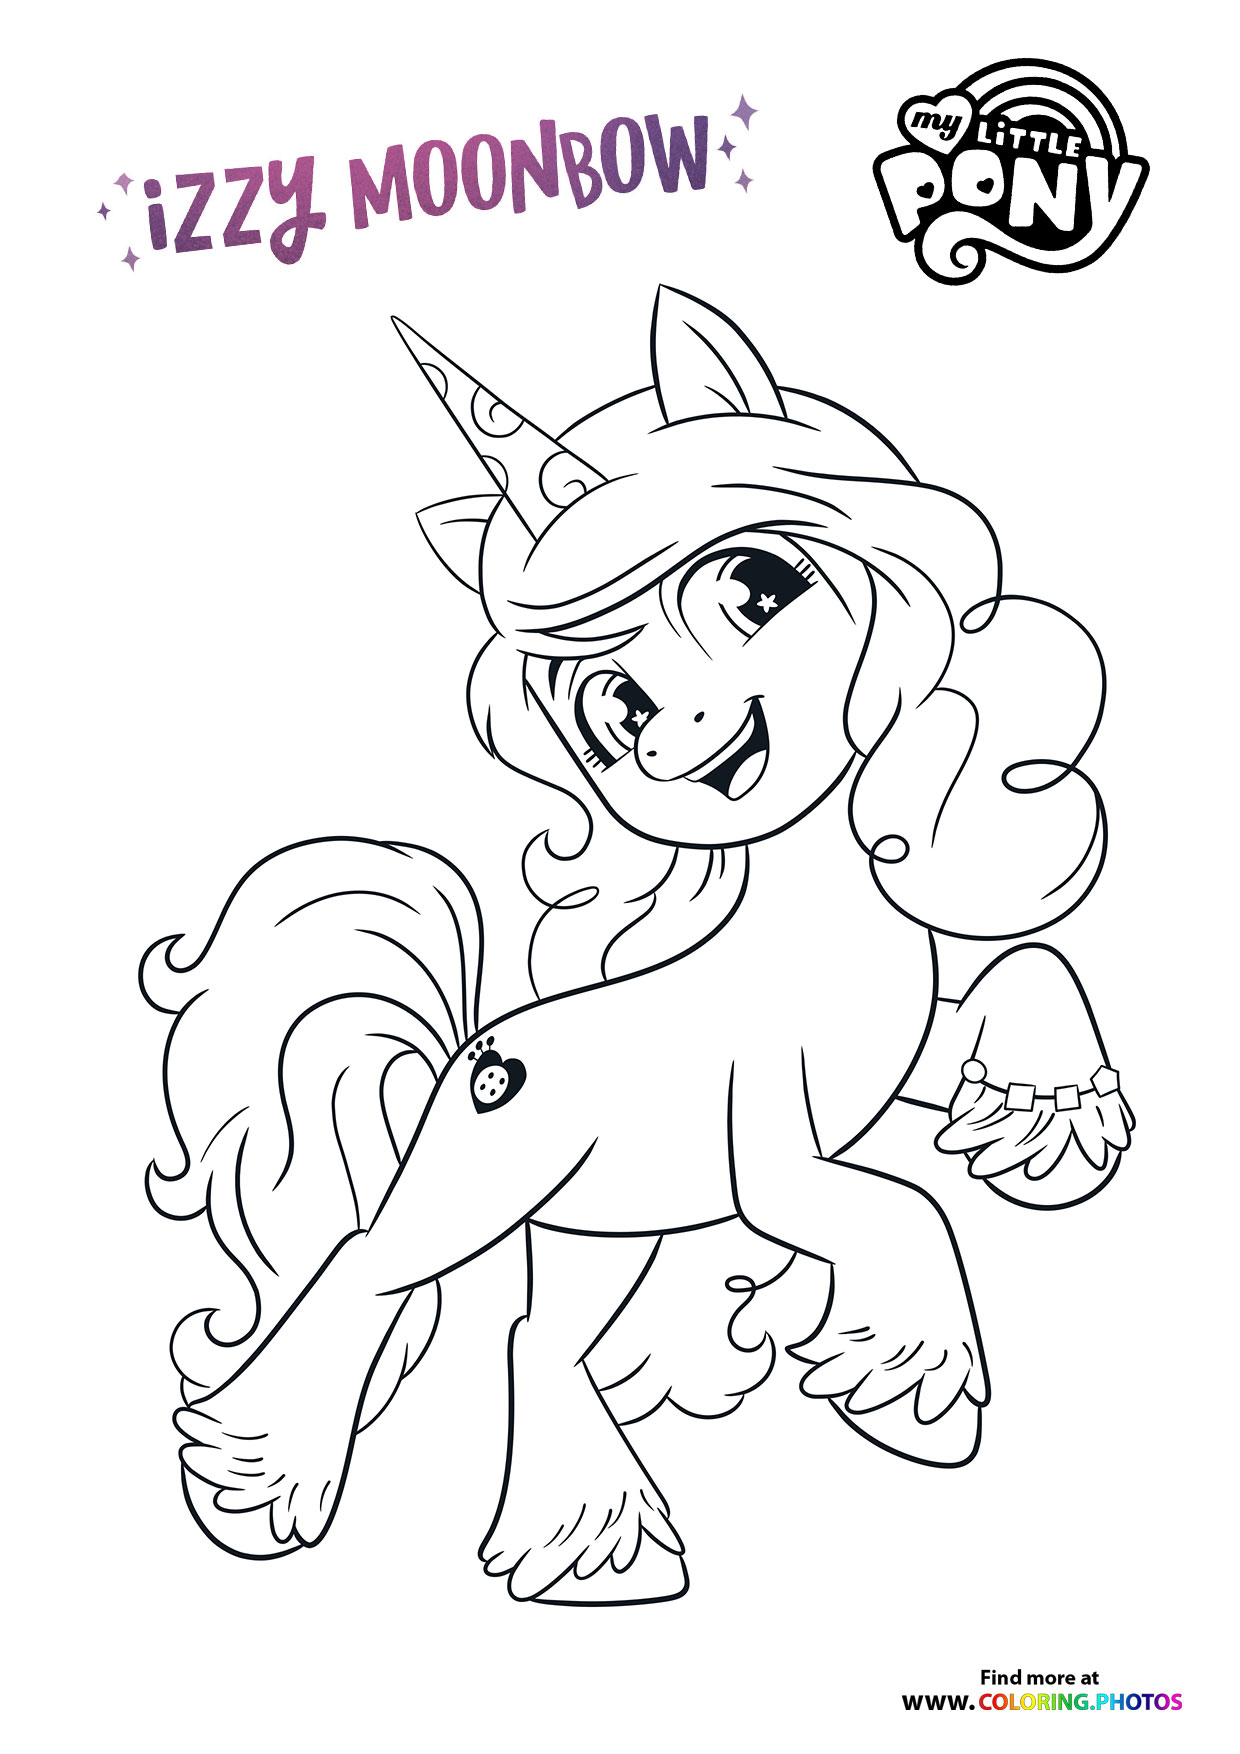 Bridlewood   My Little Pony   A New Generation   Coloring Pages for kids